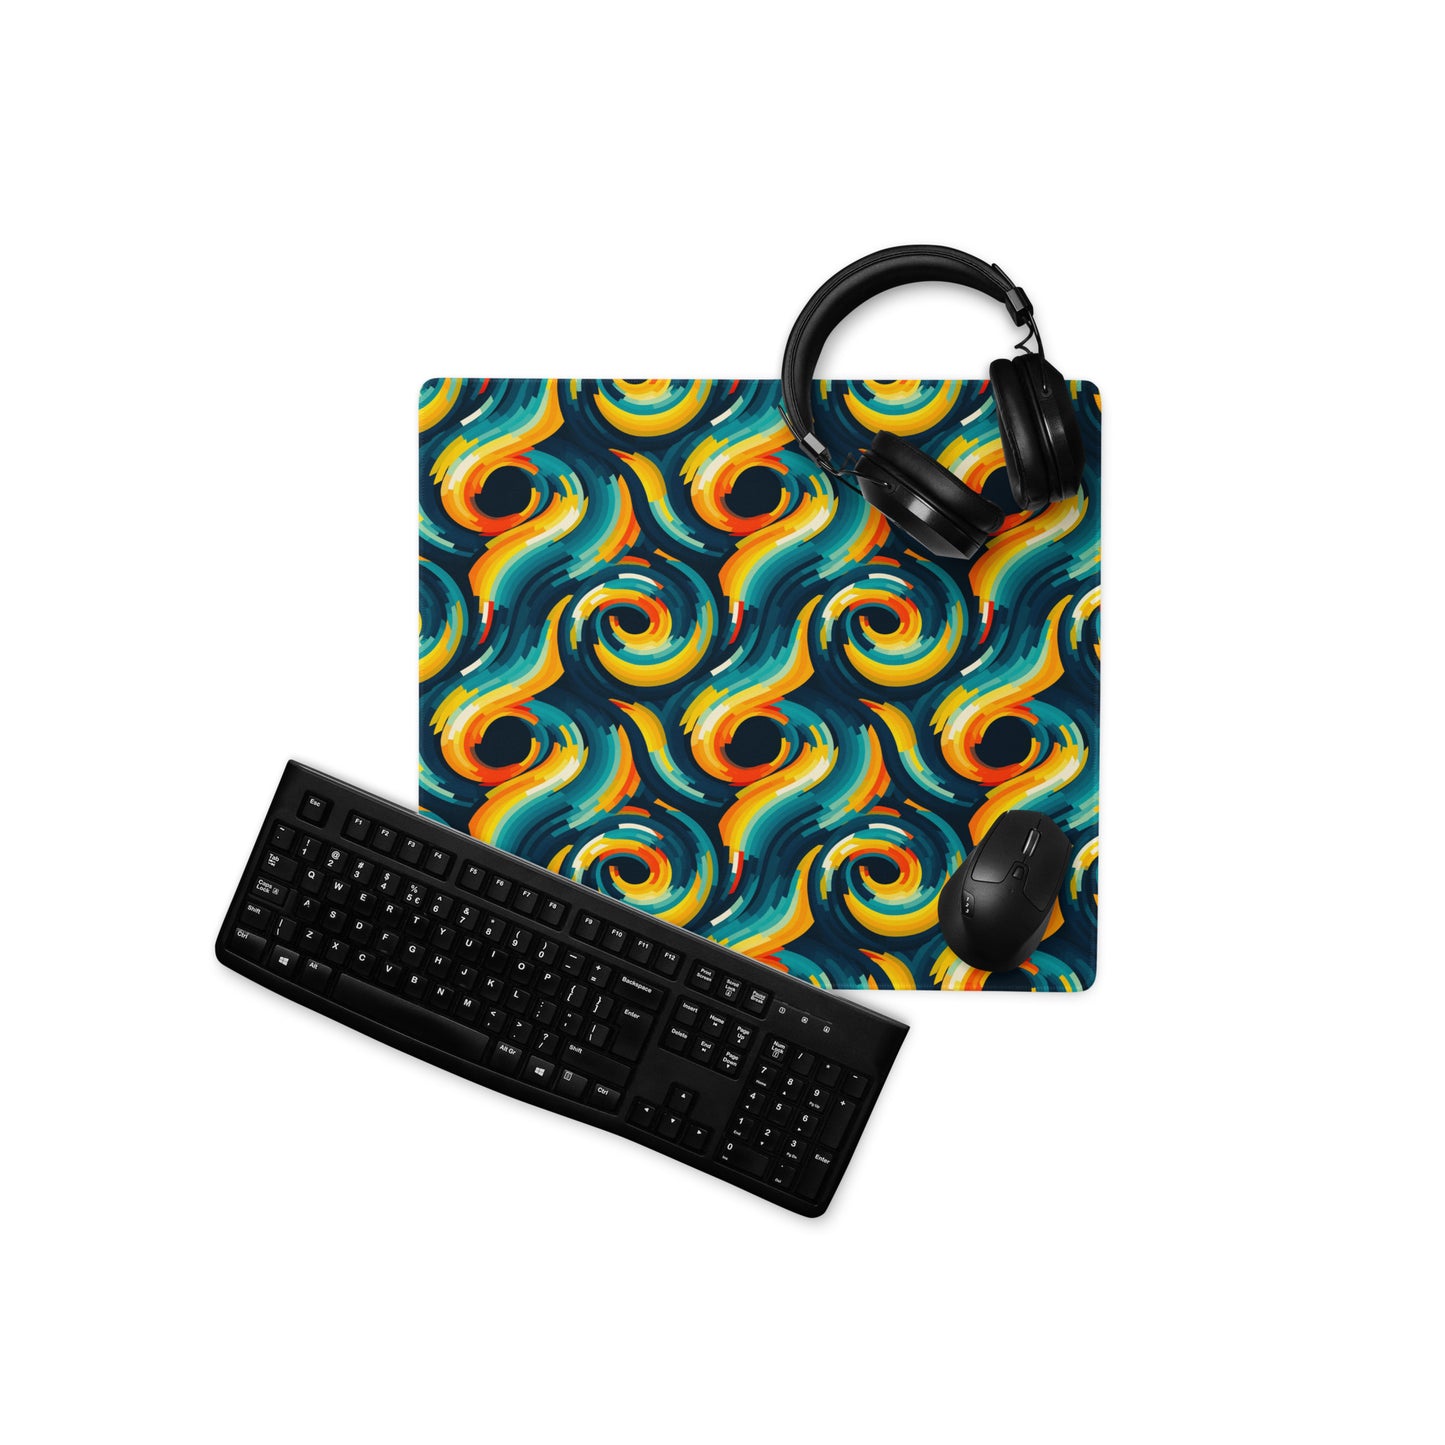 A 18" x 16" desk pad with swirls all over it displayed with a keyboard, headphones and a mouse. Yellow and Blue in color.